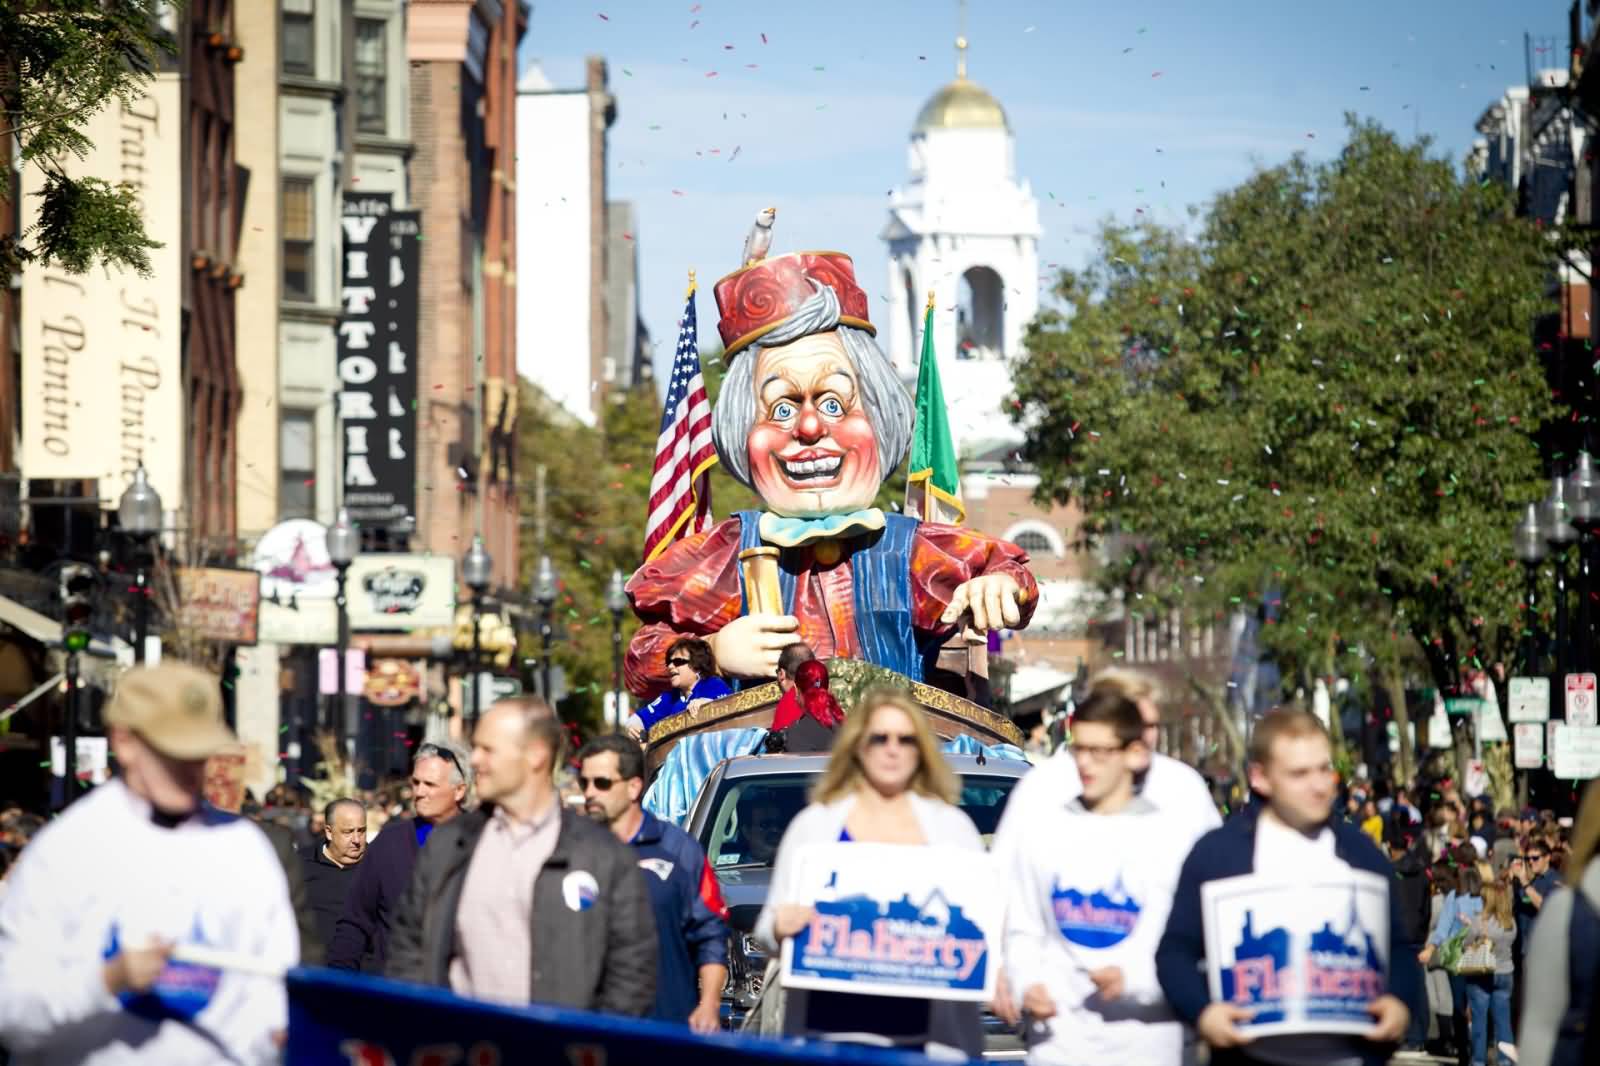 A Christopher Columbus Float Rolled Down Hanover Street During Columbus Day Parade